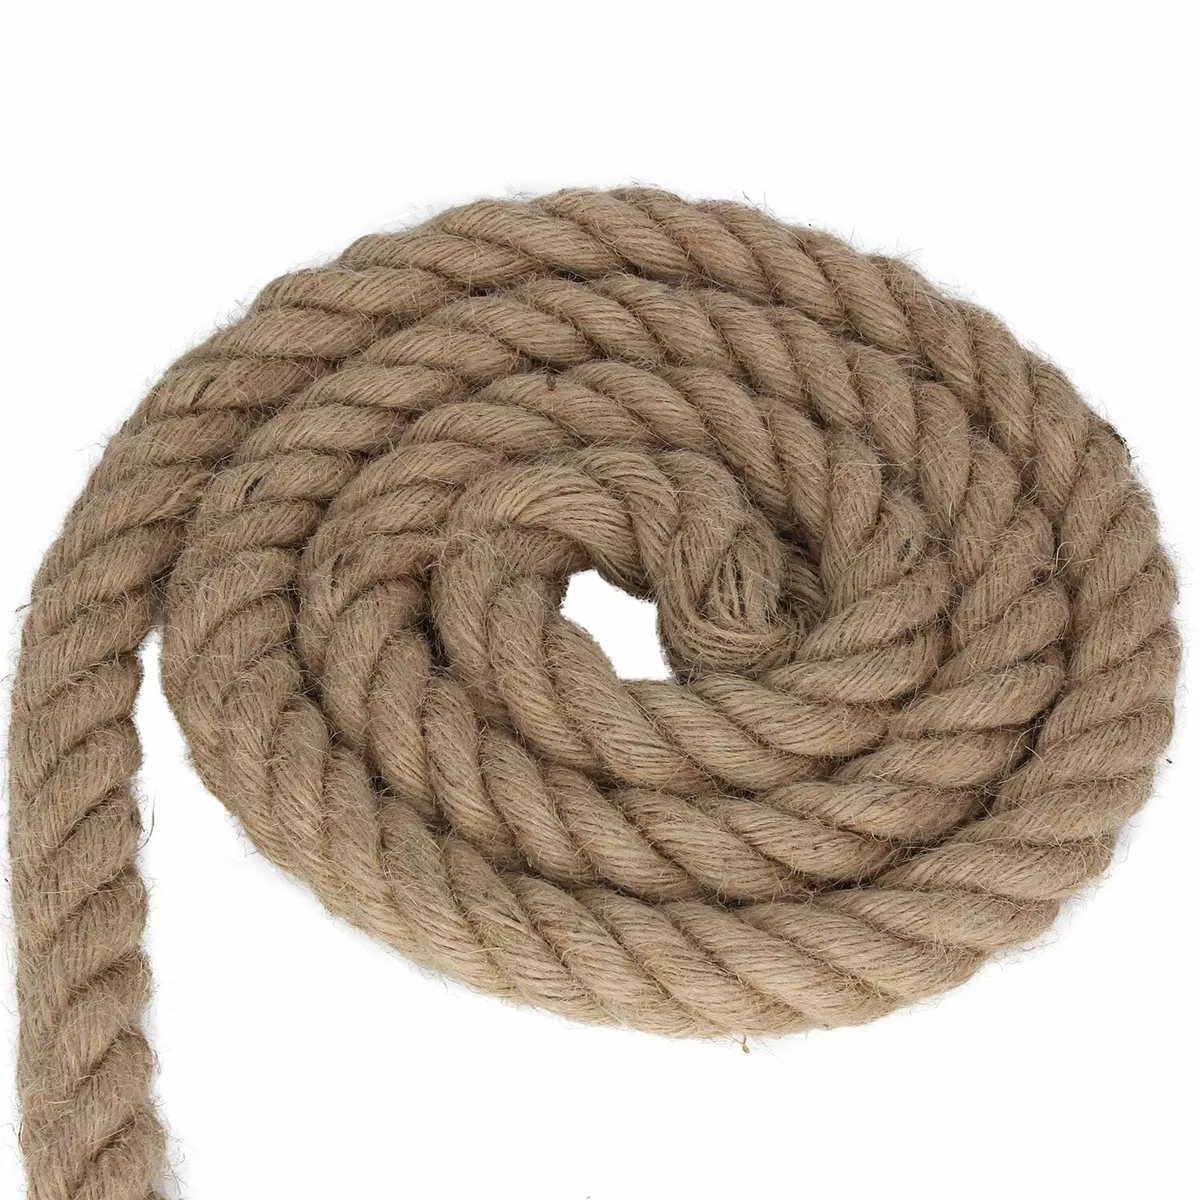 20mm Thick Natural Jute Hessian Rope Cord Braided Twisted Decking Boating  Garden